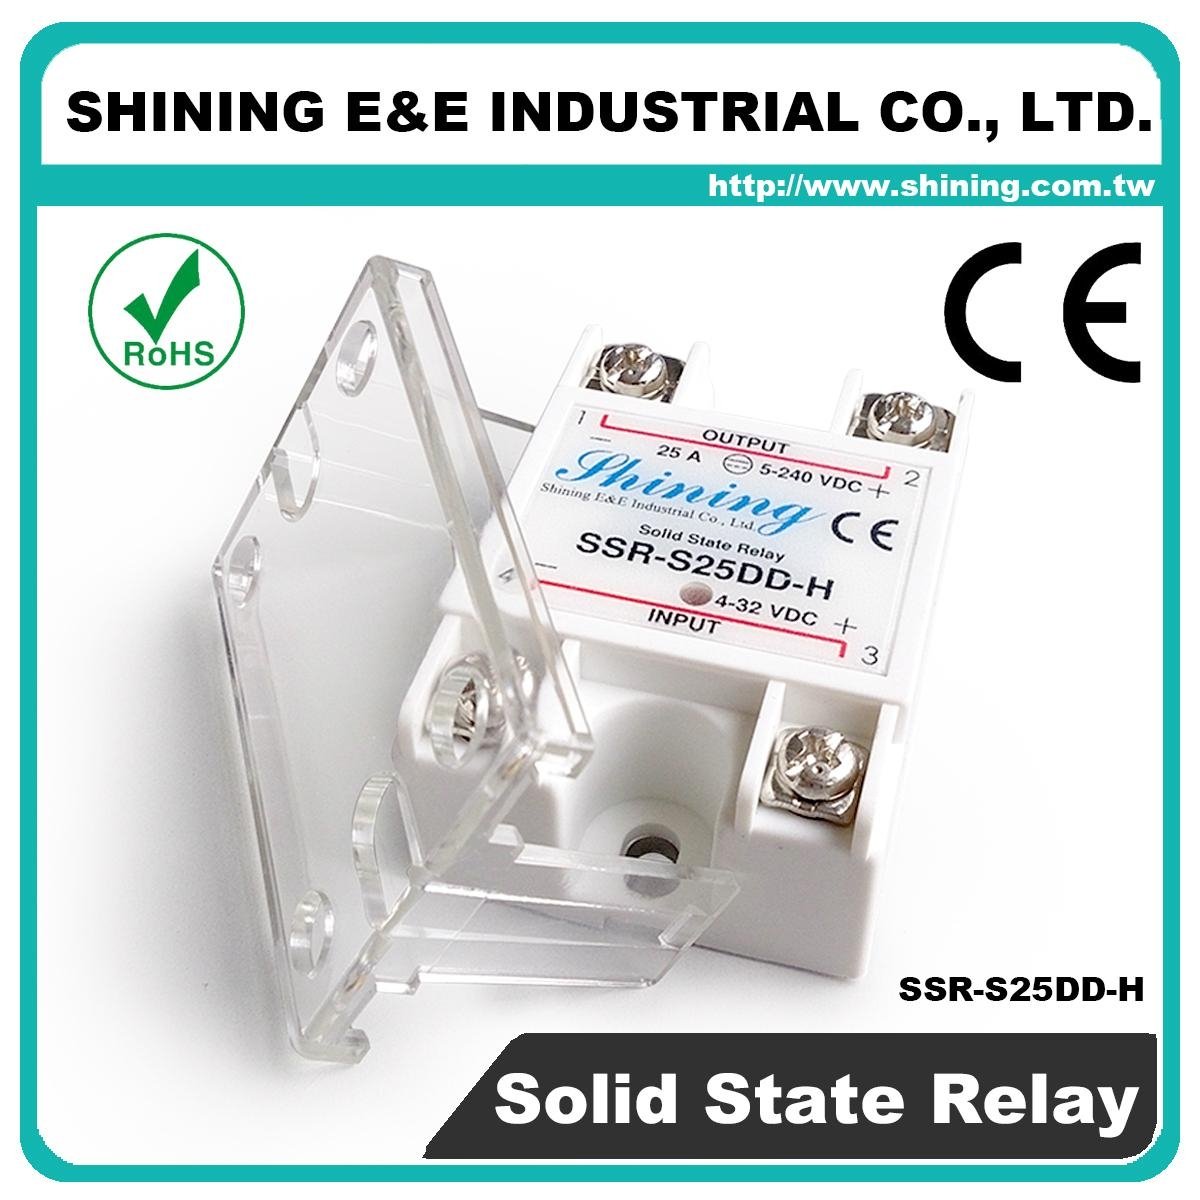 SSR-S25DD-H DC to DC 單相固態繼電器 Solid State Relay 4